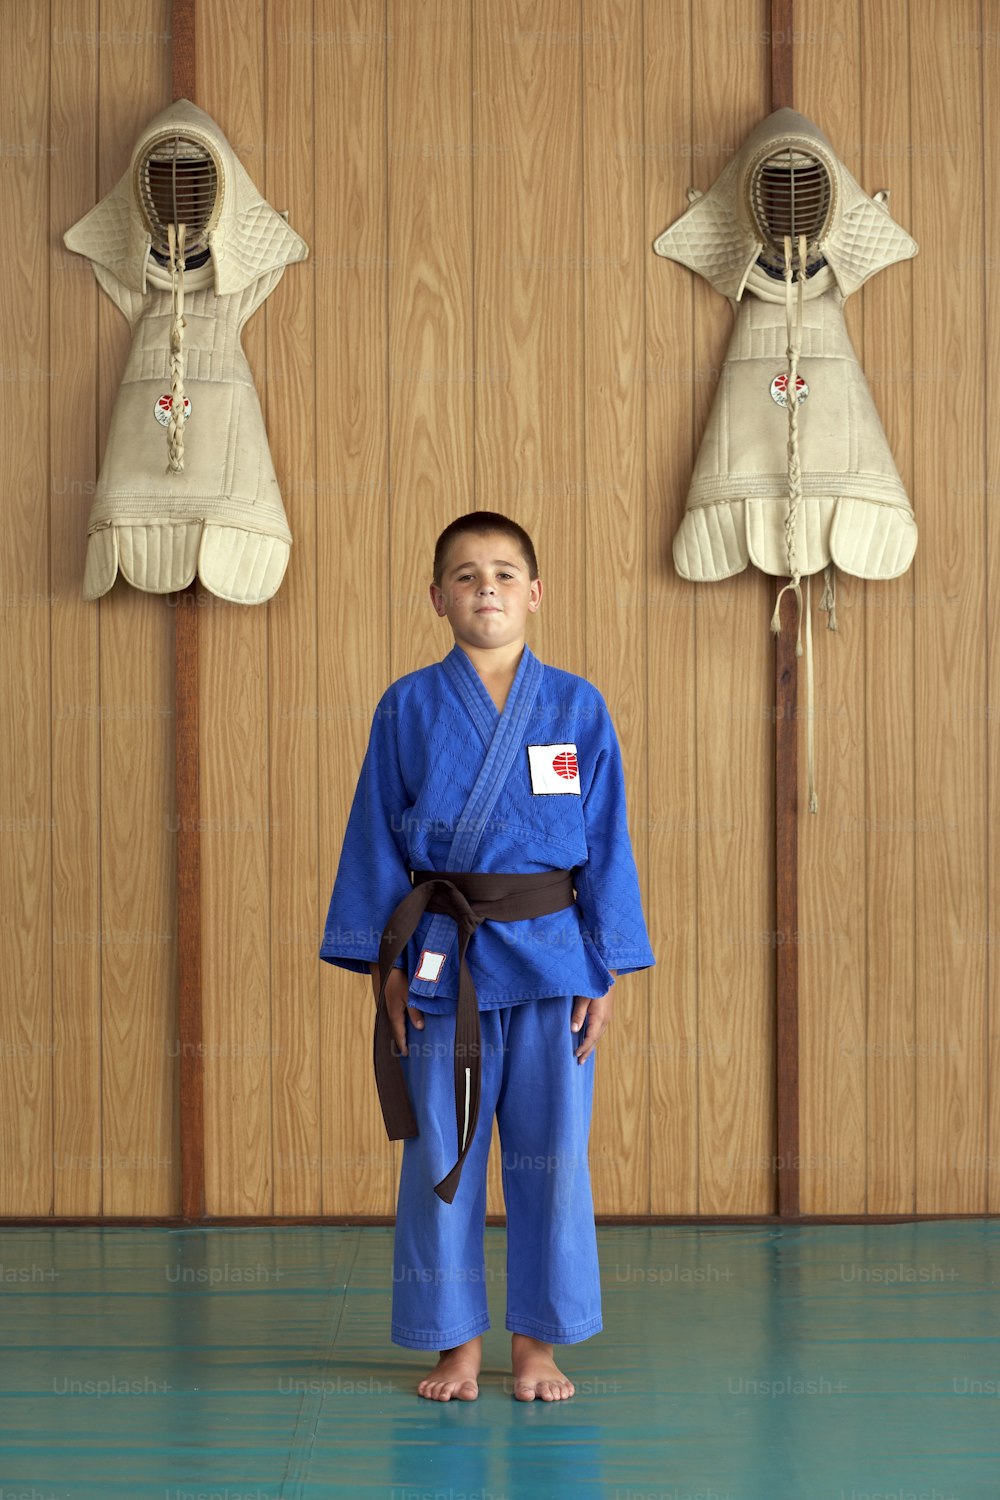 a young boy in a blue kimono standing in front of a wooden wall